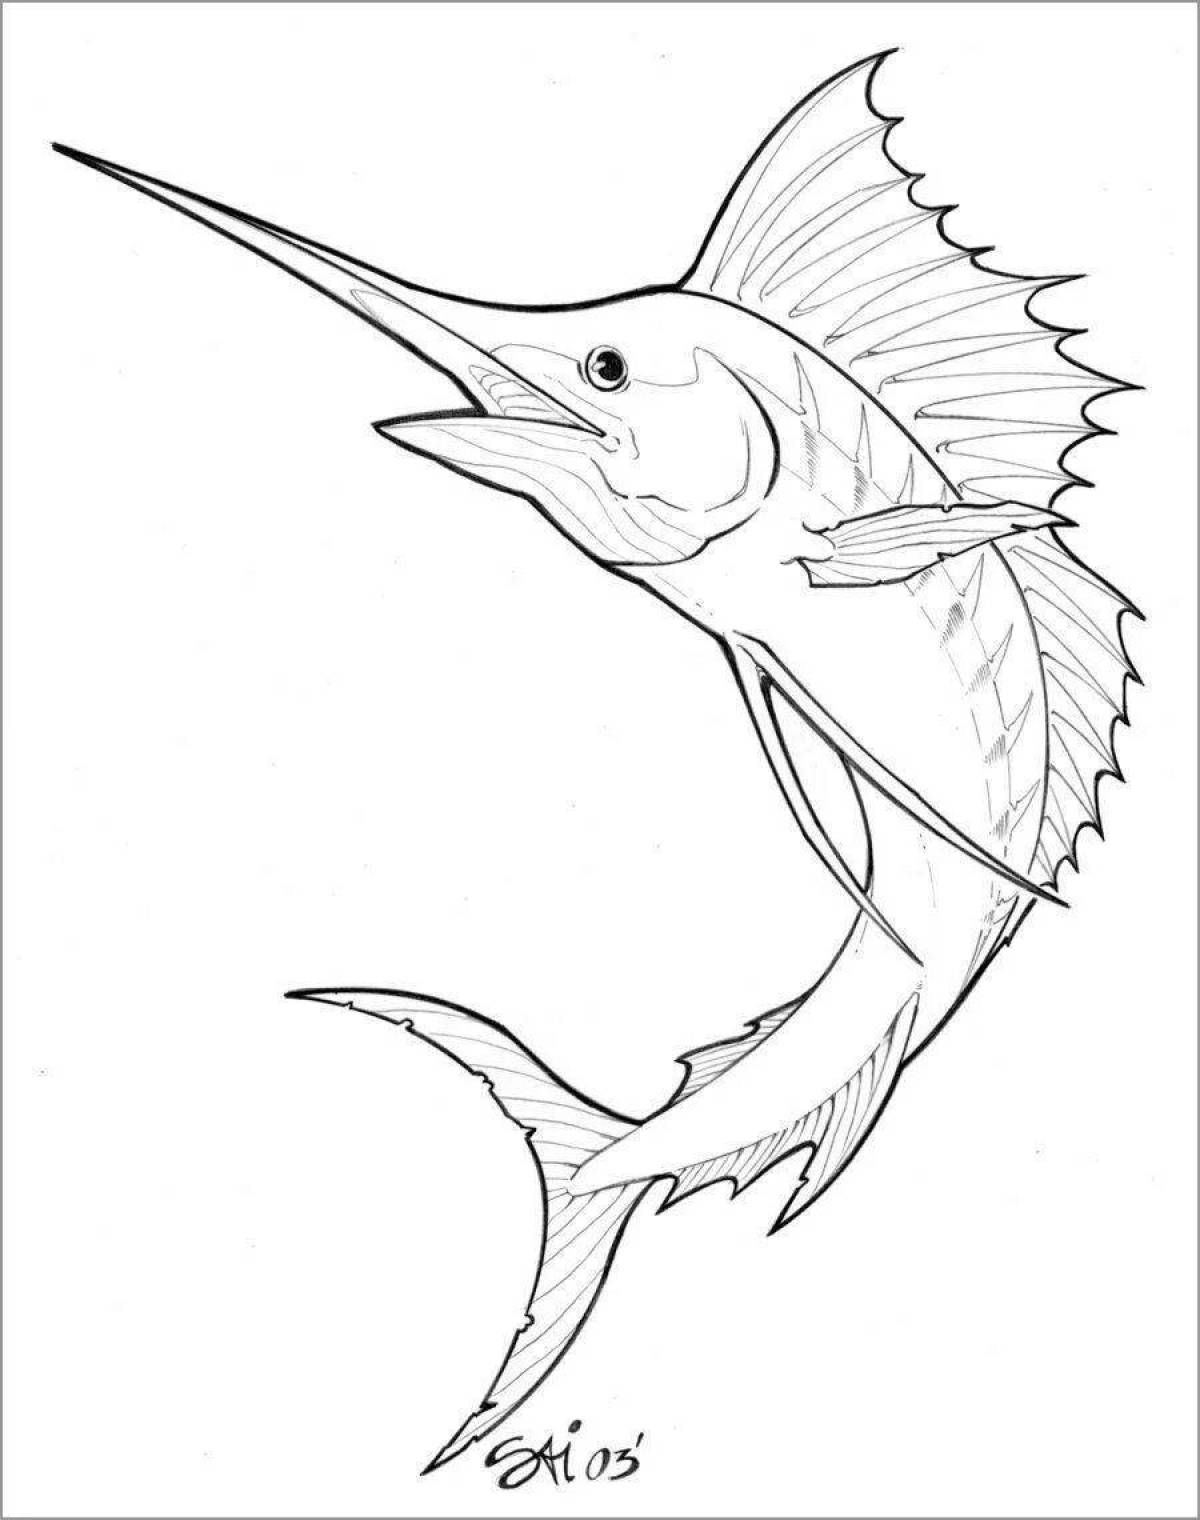 Amazing fish sword coloring book for kids